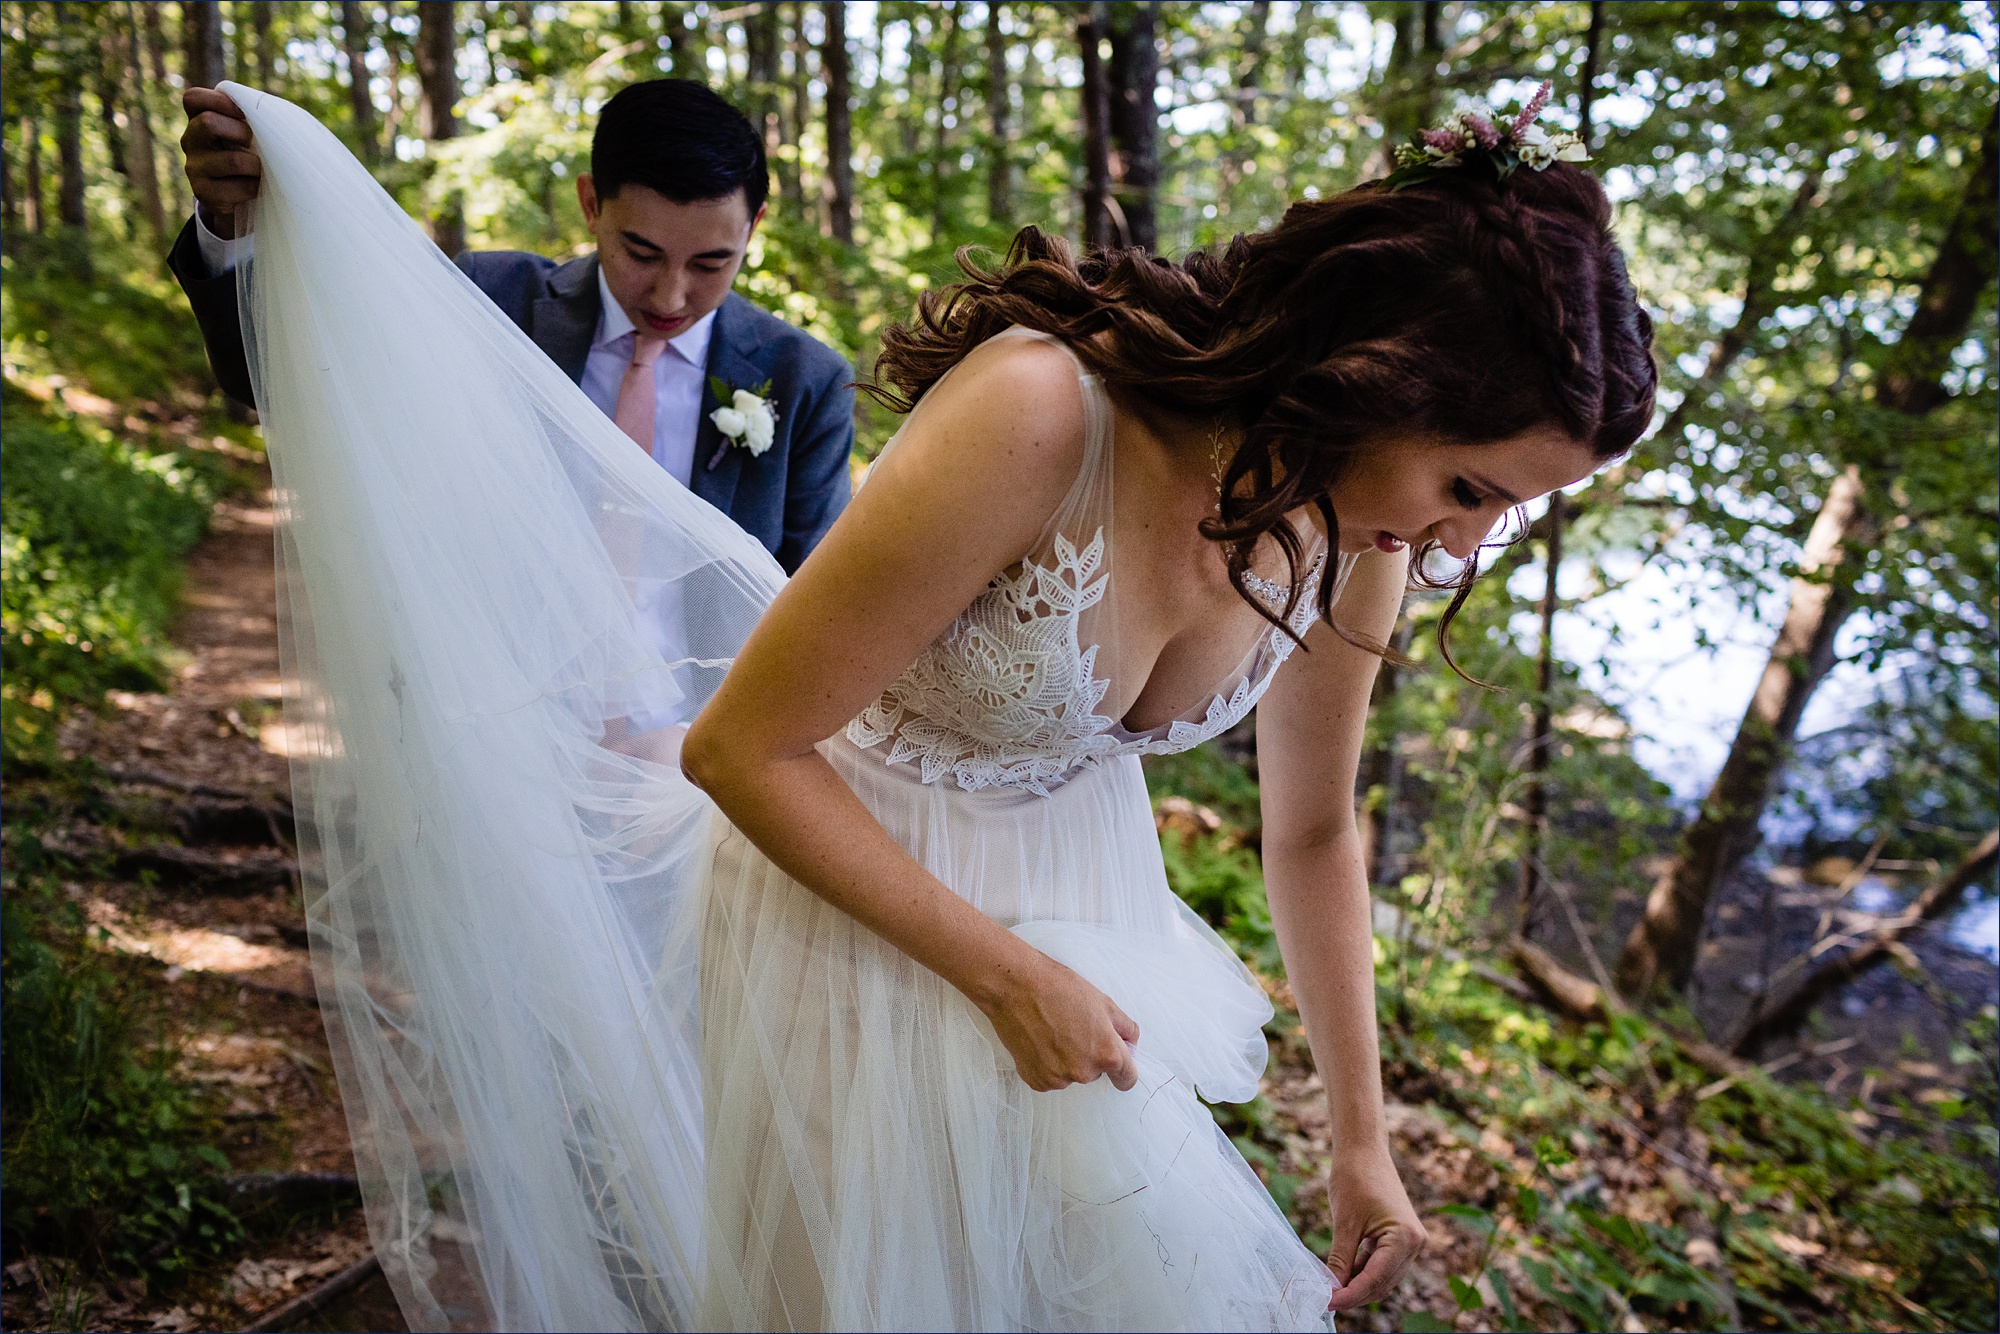 The groom helps pick leaves out of the bride's dress after walking through the woods